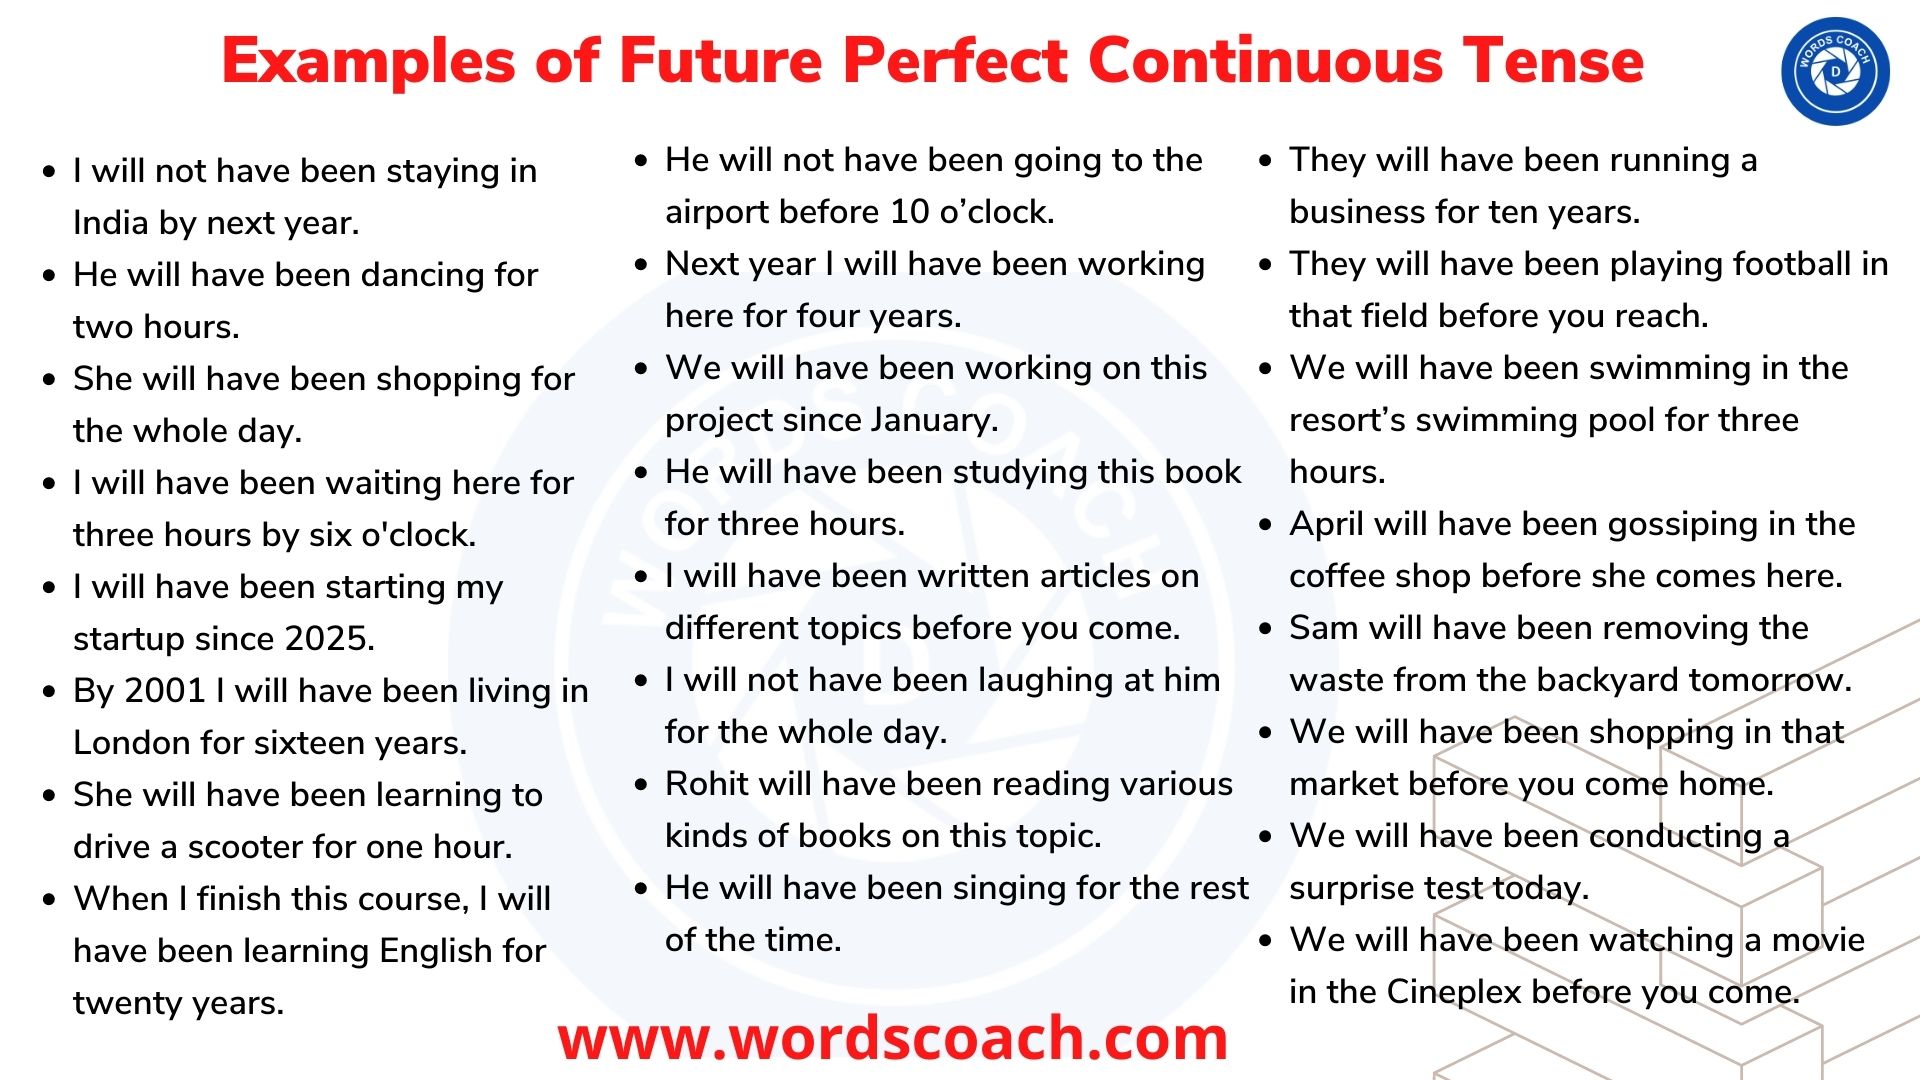 Examples of Future Perfect Continuous Tense - wordscoach.com